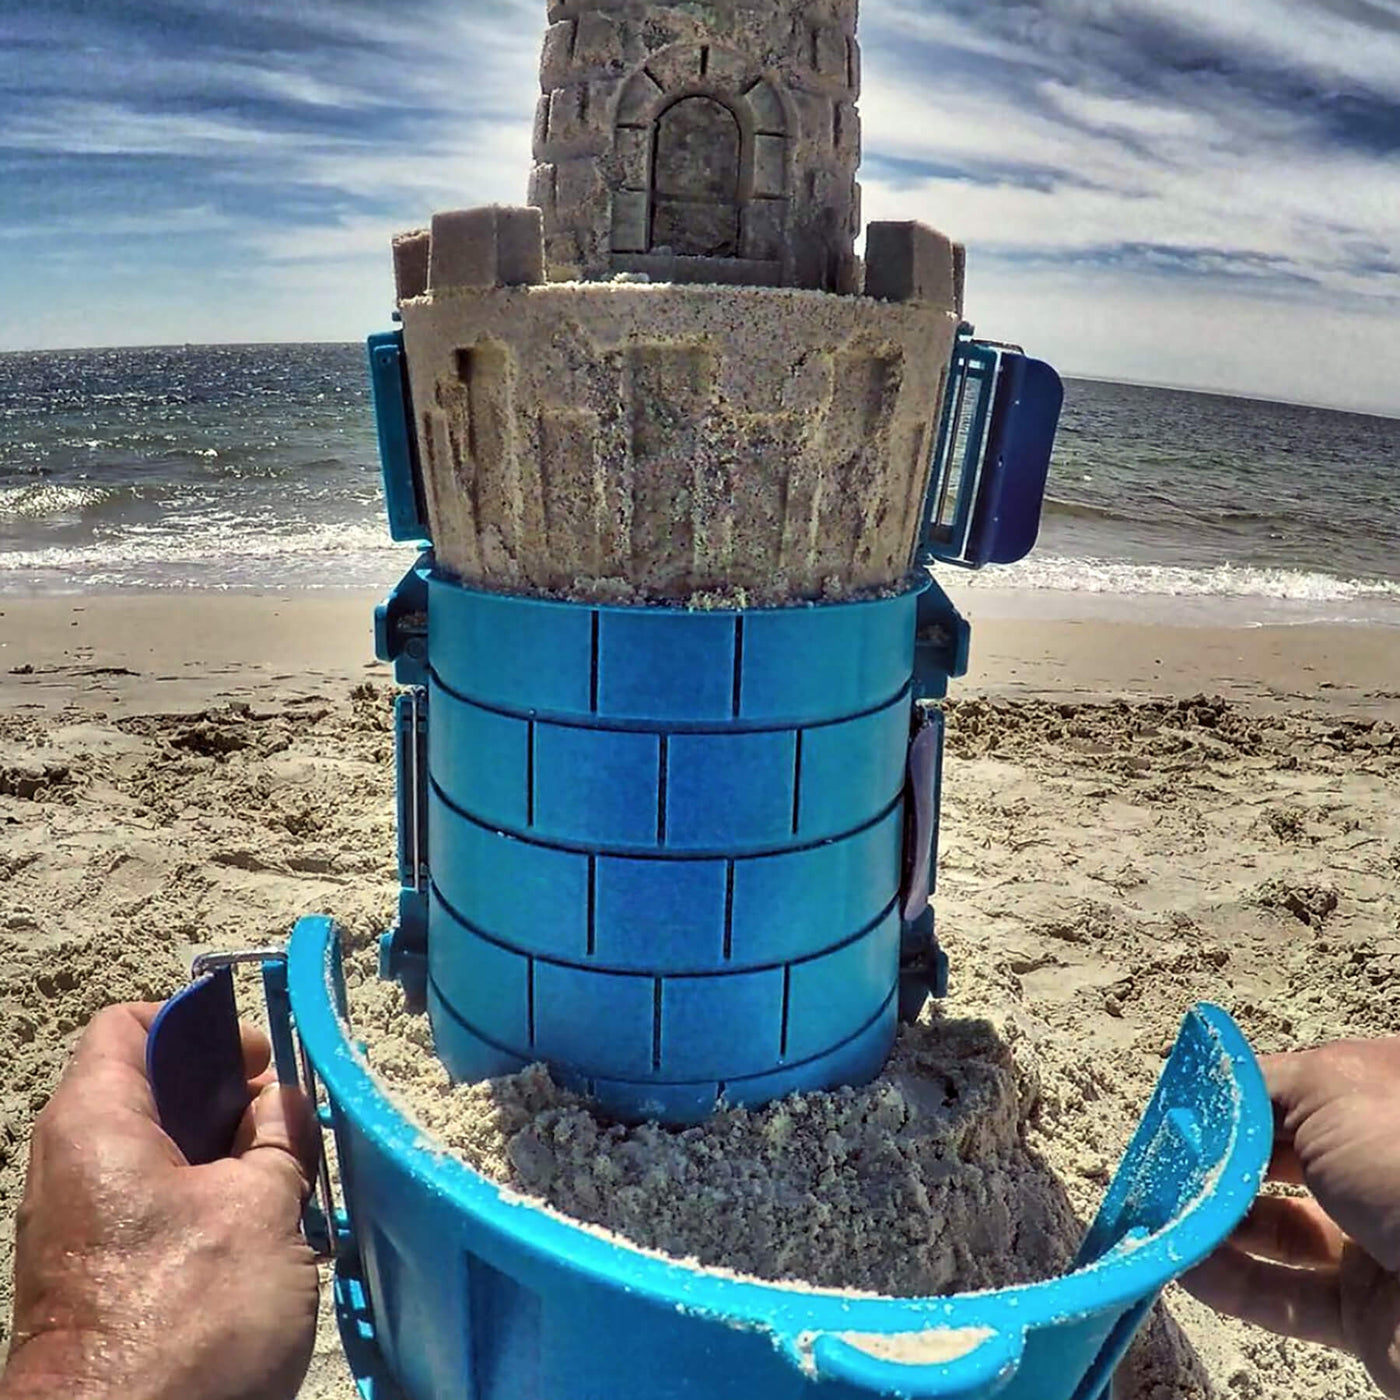 Revolutionary split molds take your sand or snow castle building experience to a whole new level!